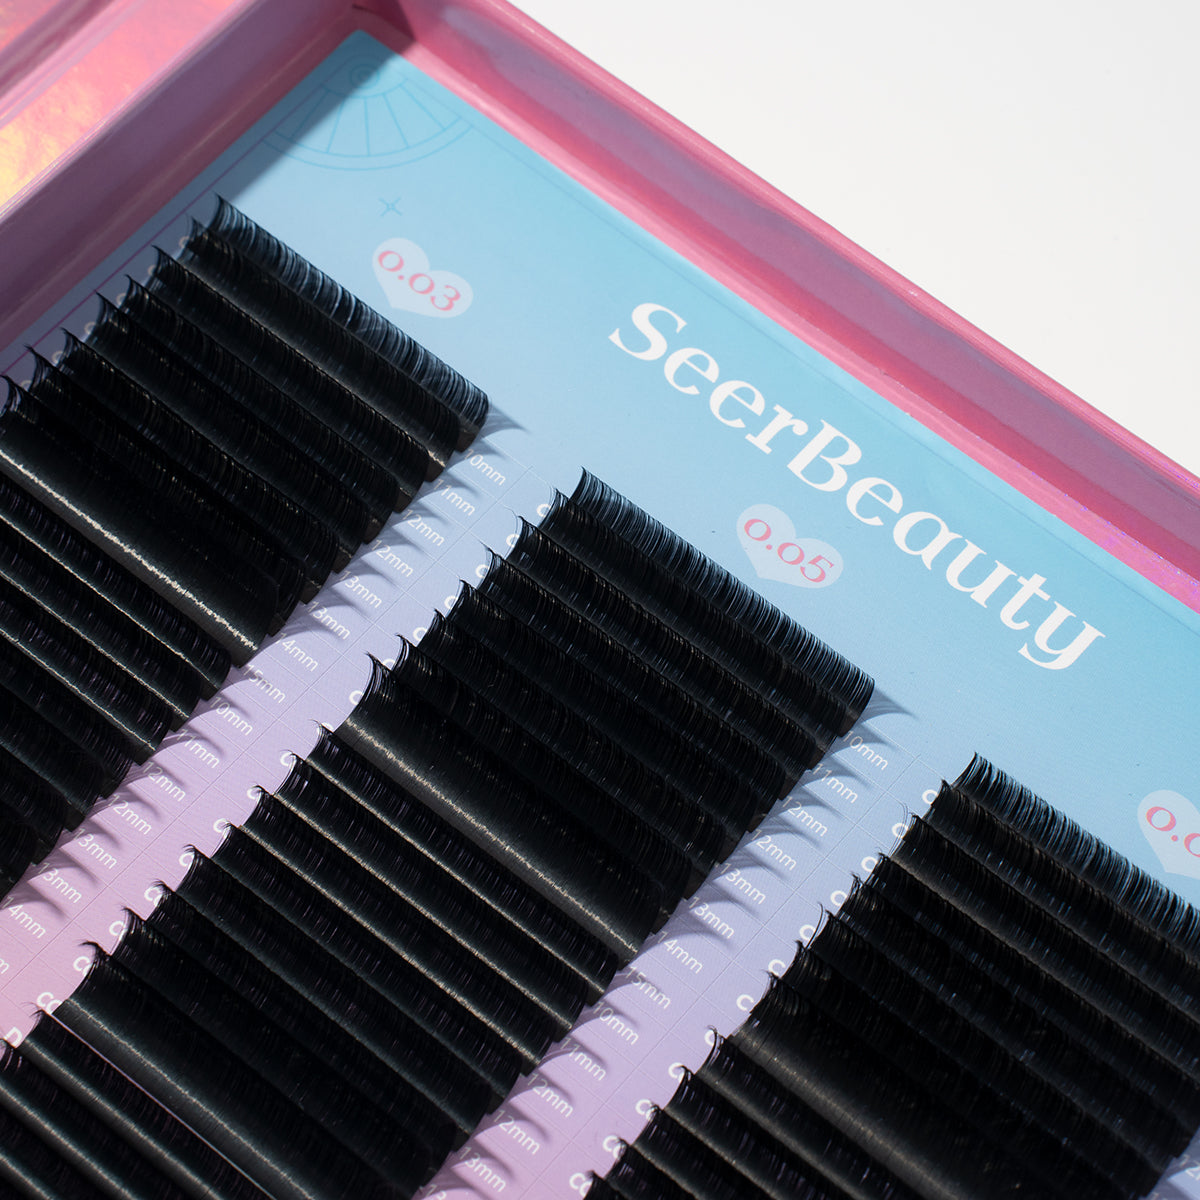 72 Rows Luxmere Lashes seerbeauty